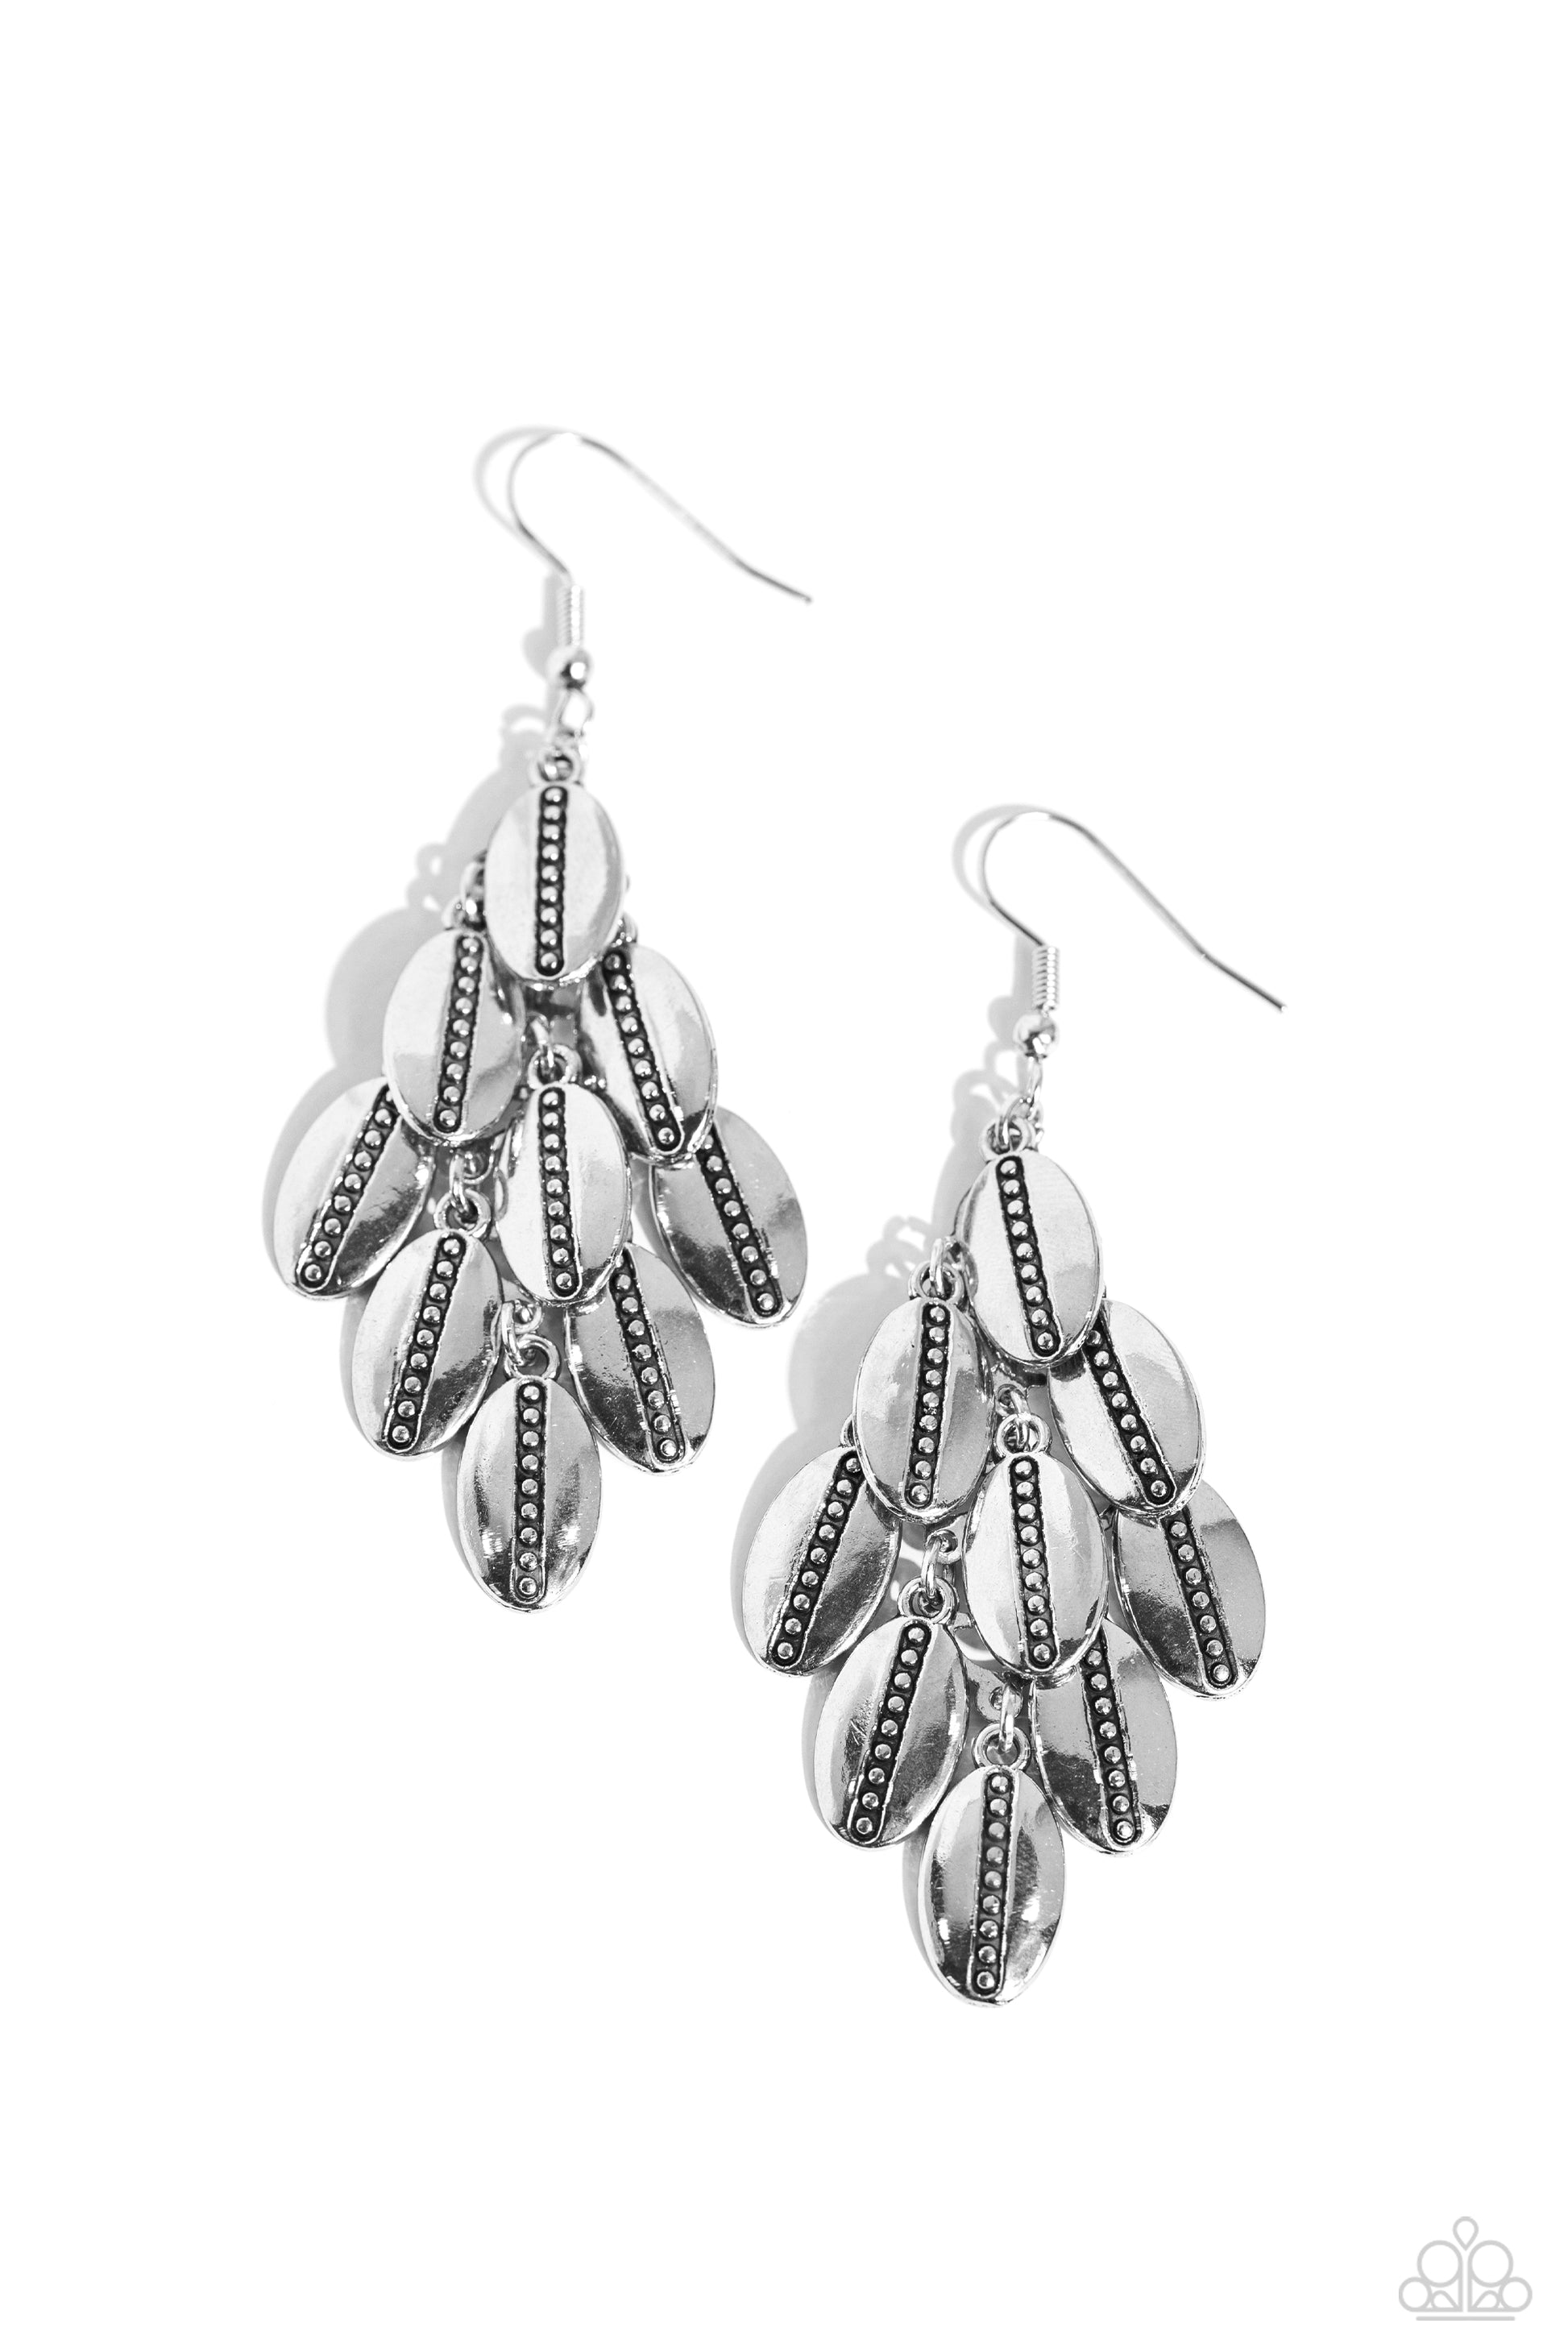 Dainty silver studs are pressed down the centers of oval silver frames that cascade from a silver netted backdrop, resulting in a rustic chandelier. Earring attaches to a standard fishhook fitting.  Sold as one pair of earrings.